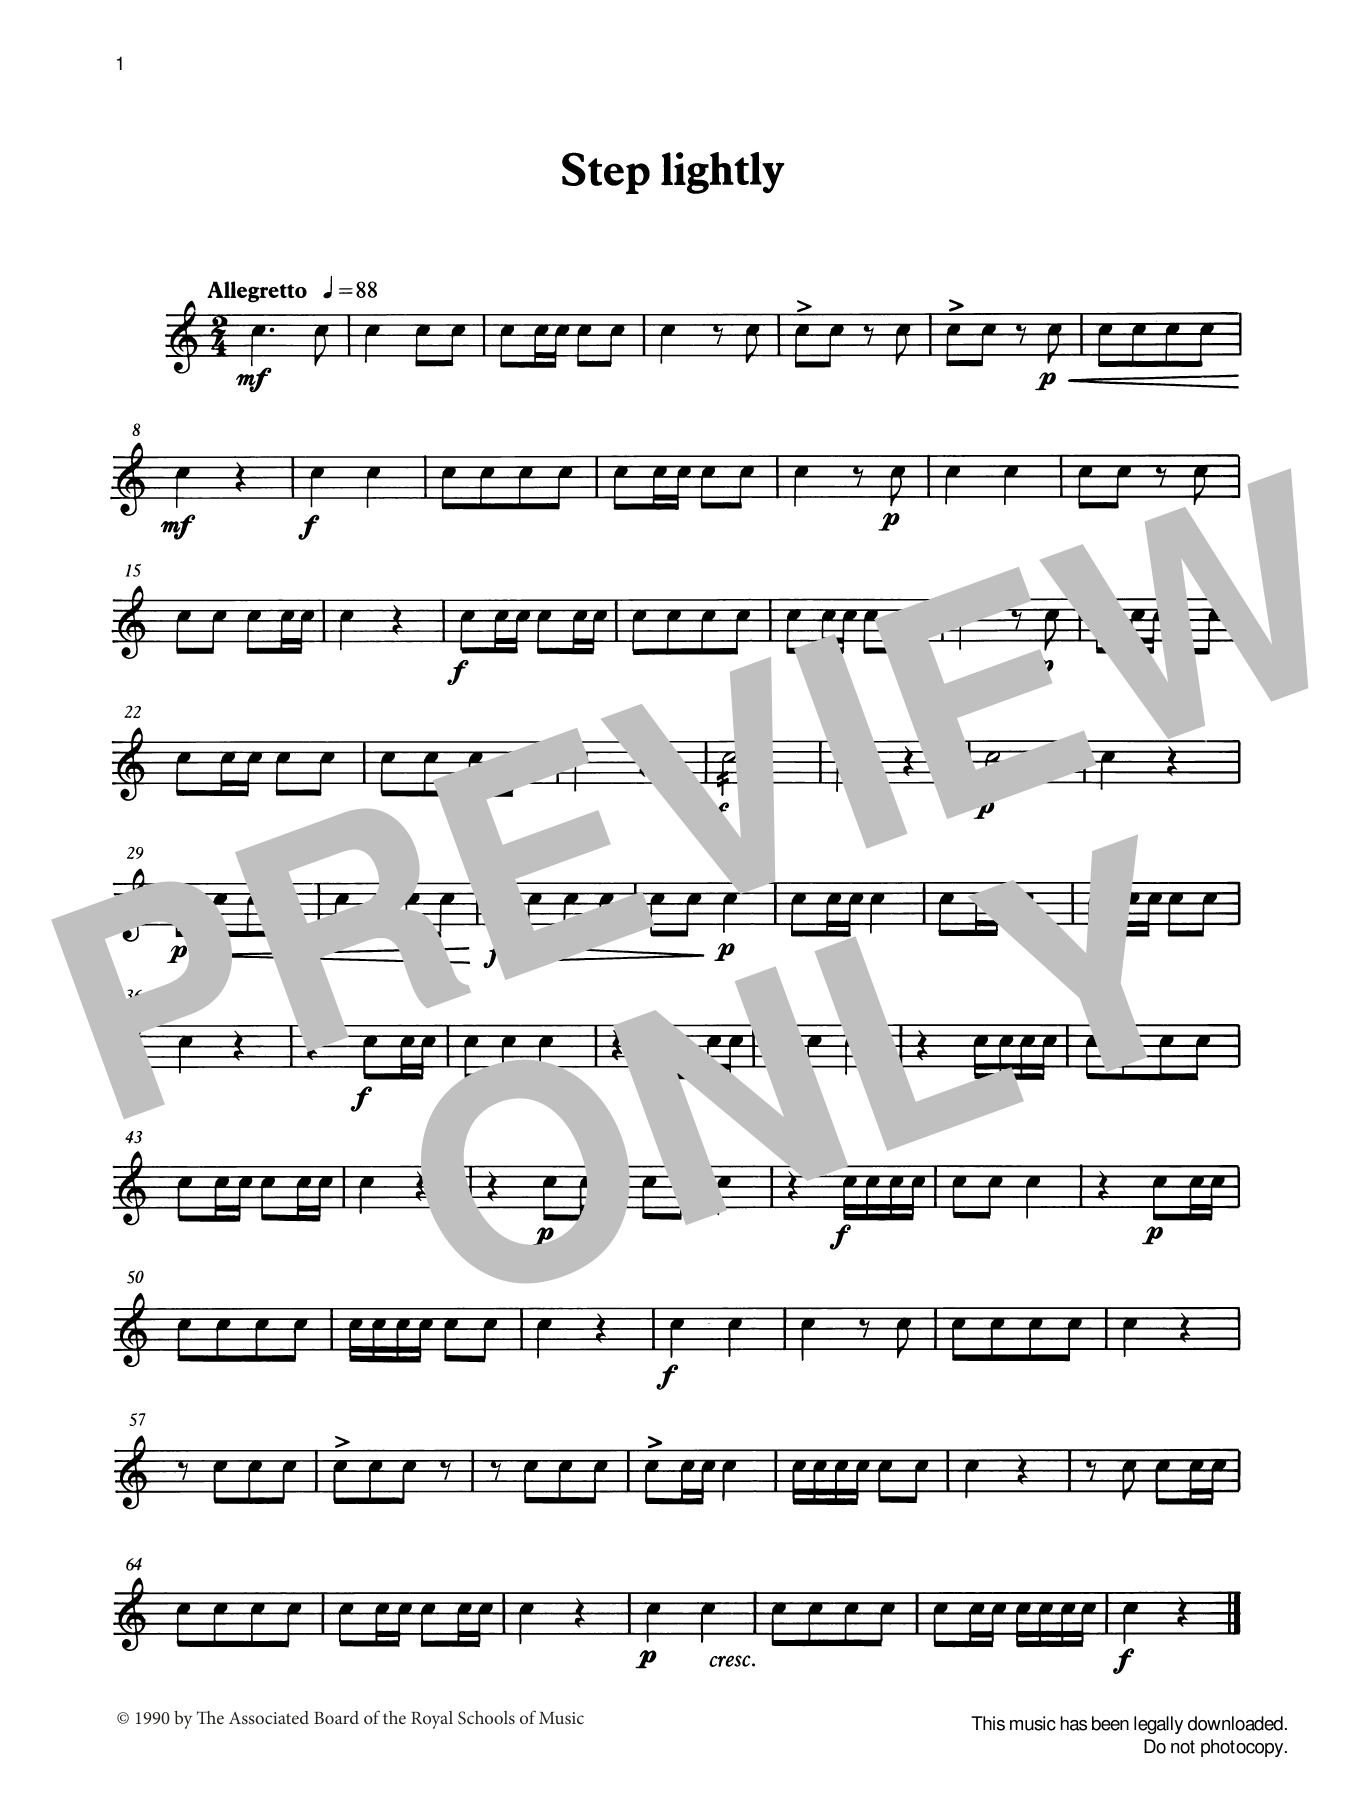 Step Lightly from Graded Music for Snare Drum, Book I (Percussion Solo) von Ian Wright and Kevin Hathaway